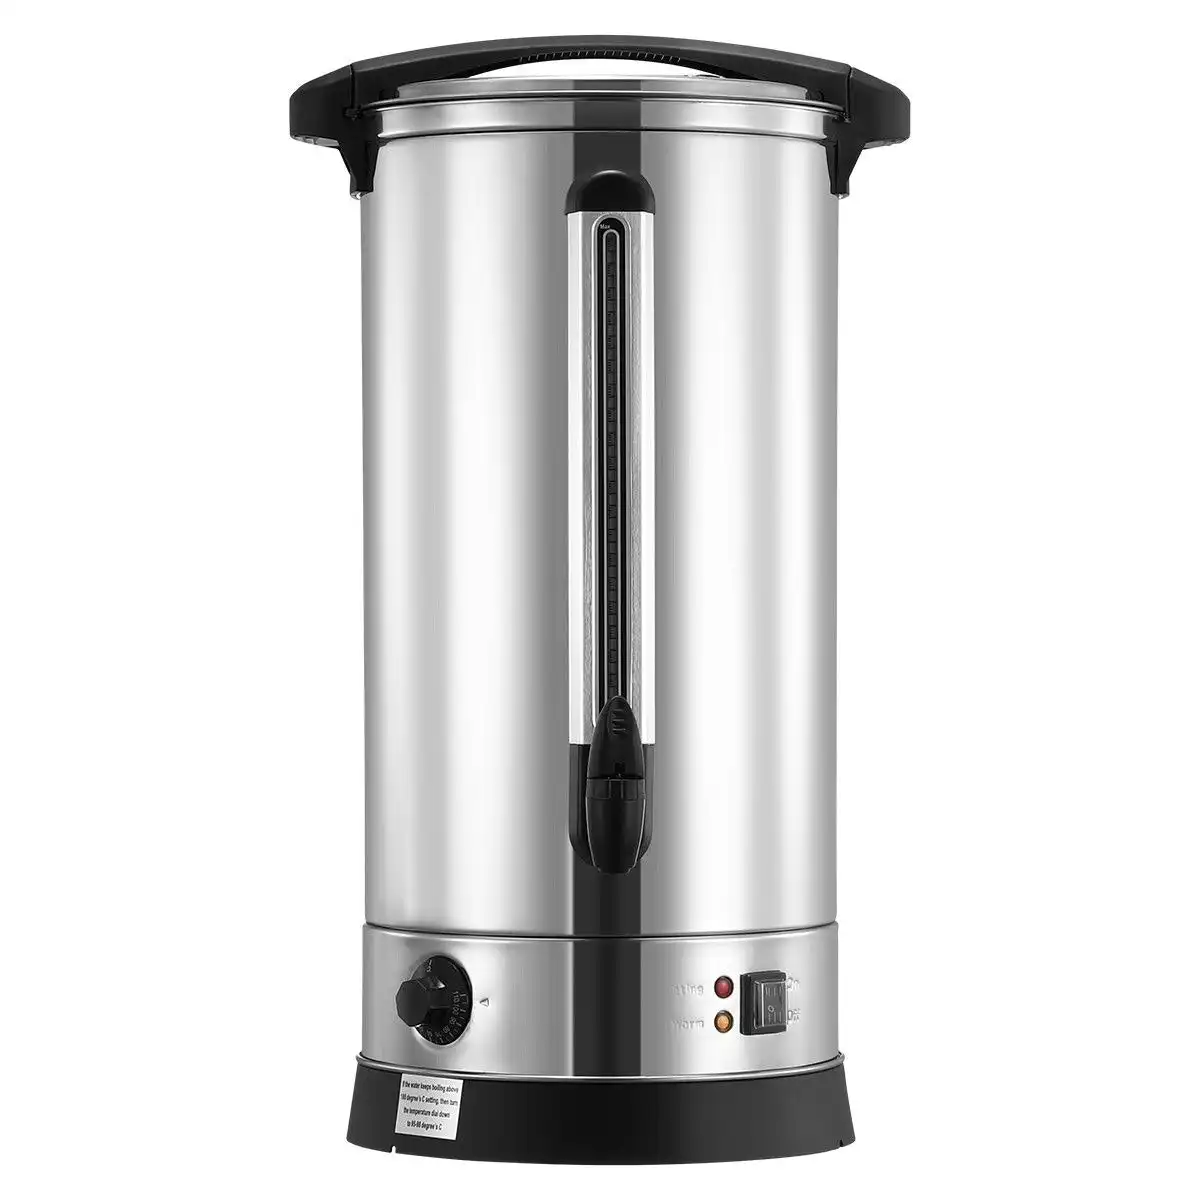 Maxkon  28L Stainless Steel Hot Water Urn 2500W Electric Hot Beverage Dispenser with Boil Dry Protection